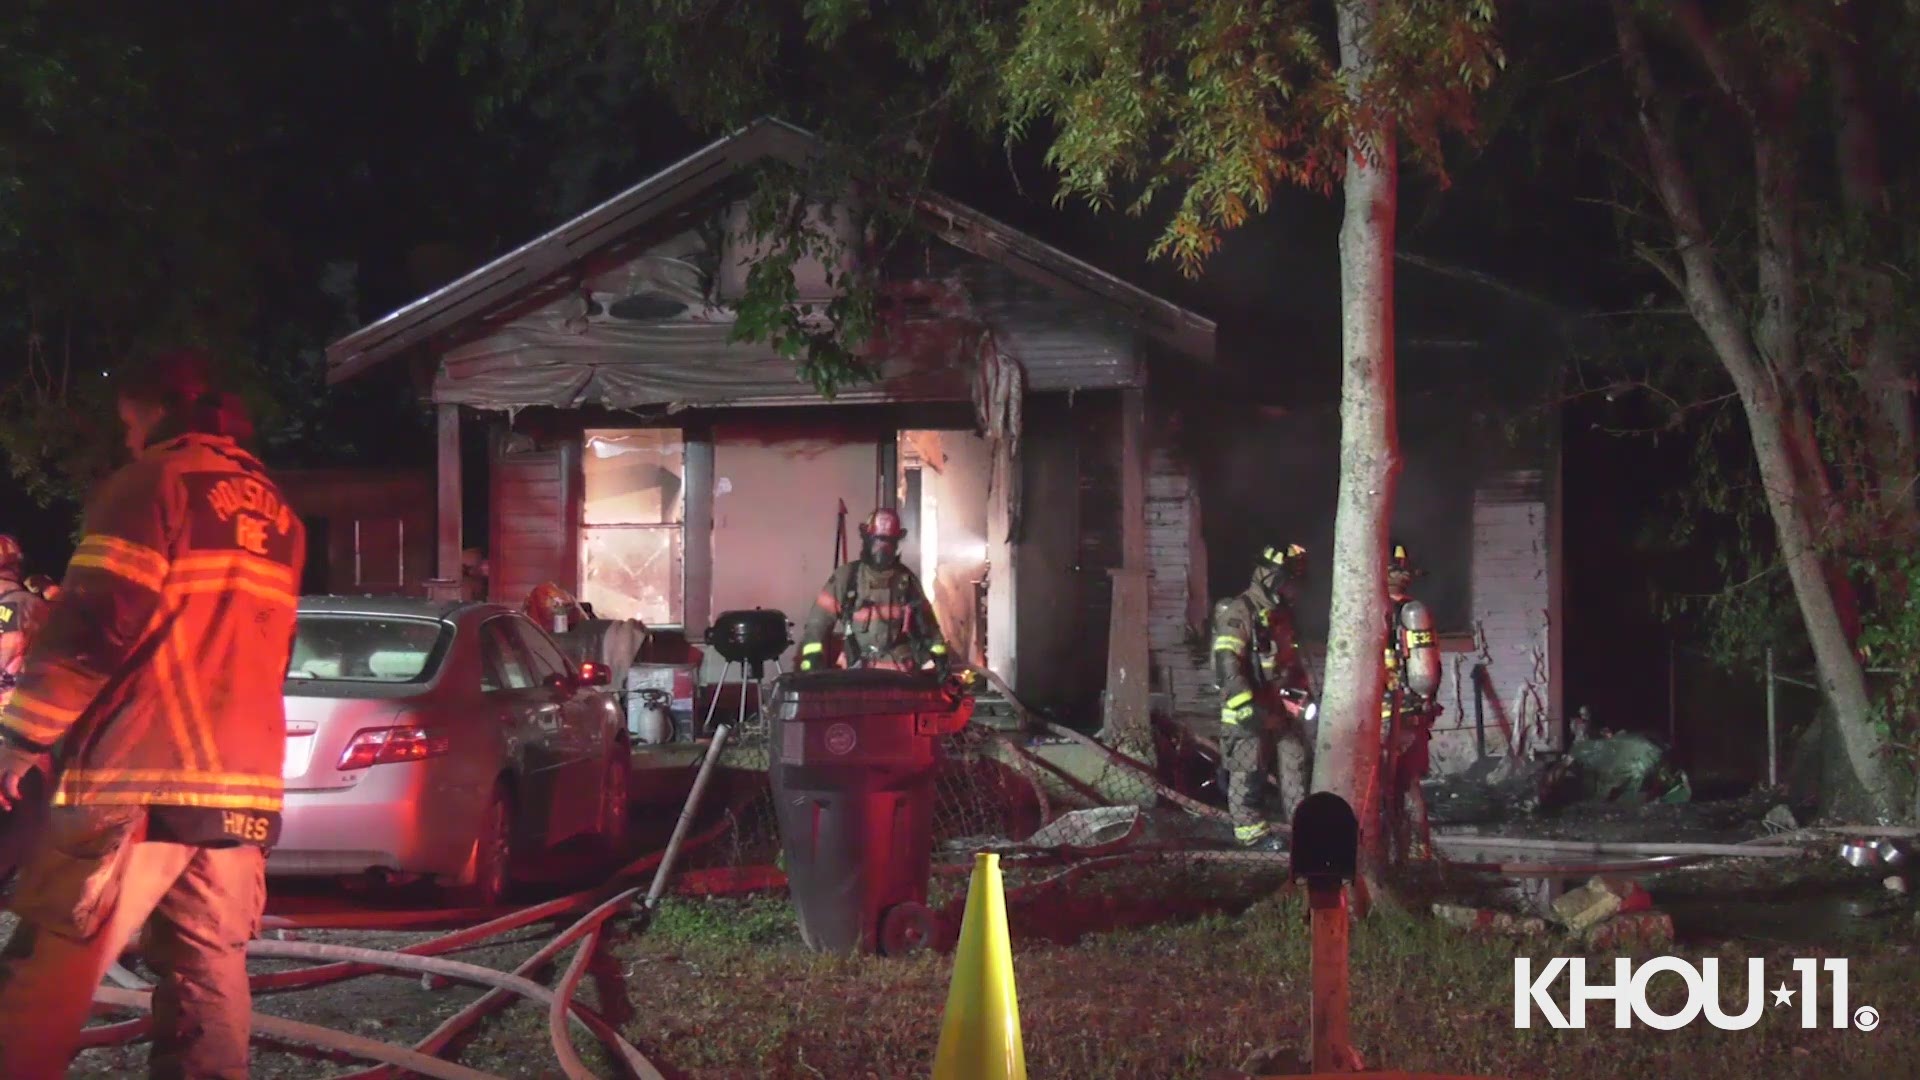 A mother and her three children are safe after a fire erupted at their home overnight in northeast Houston.